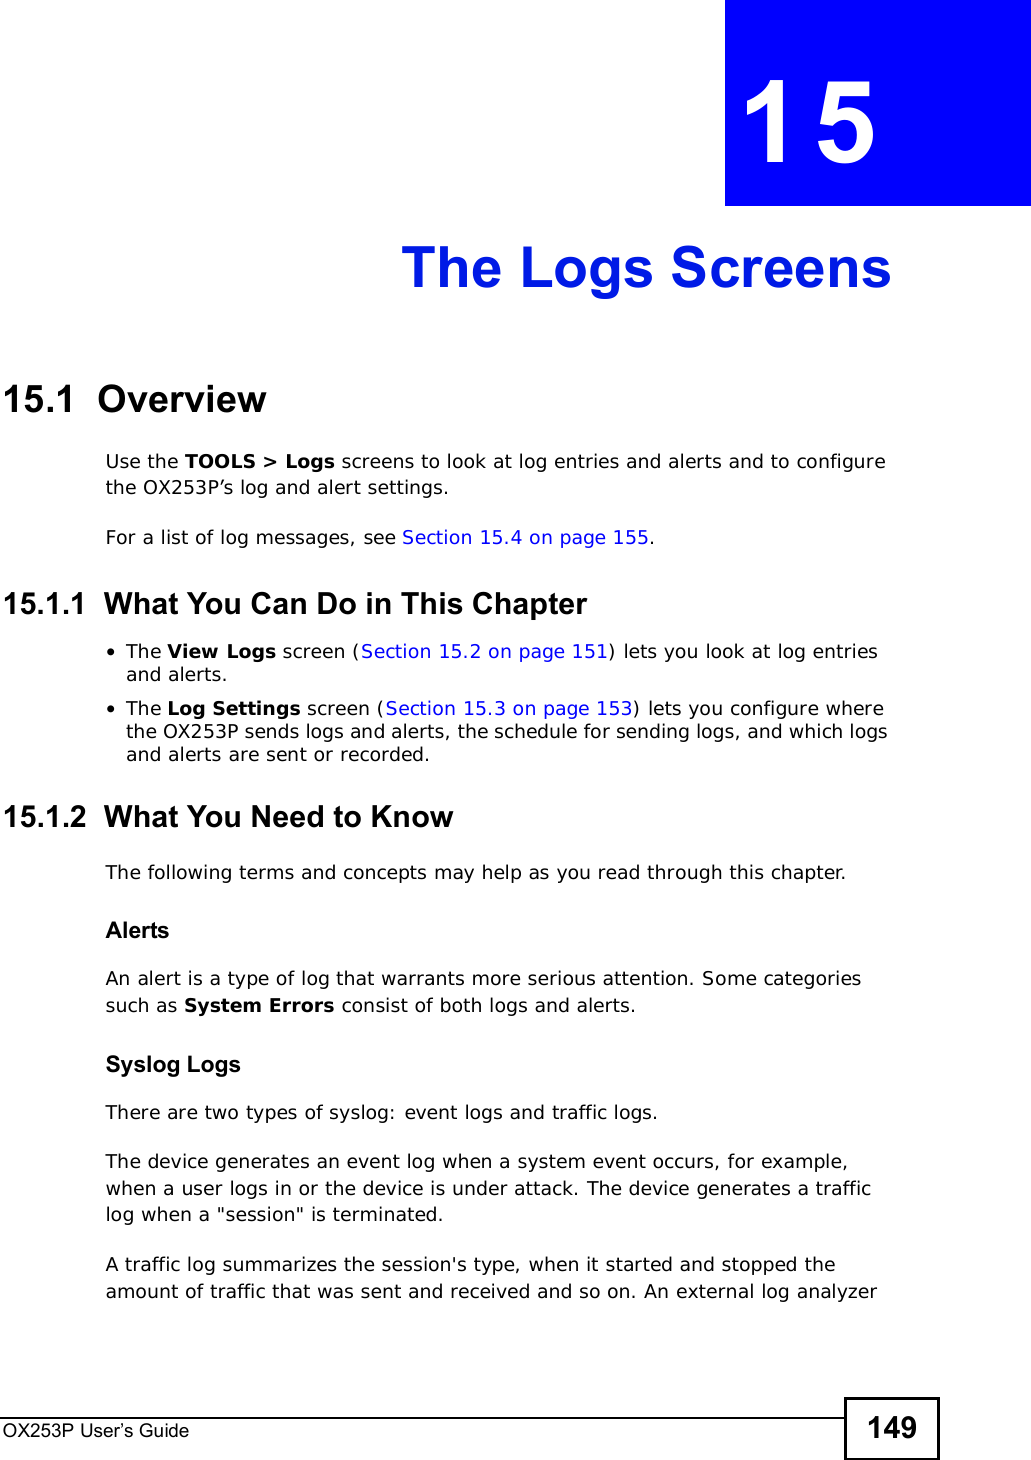 OX253P User’s Guide 149CHAPTER 15The Logs Screens15.1  OverviewUse the TOOLS &gt; Logs screens to look at log entries and alerts and to configure the OX253P’s log and alert settings.For a list of log messages, see Section 15.4 on page 155.15.1.1  What You Can Do in This Chapter•The View Logs screen (Section 15.2 on page 151) lets you look at log entries and alerts.•The Log Settings screen (Section 15.3 on page 153) lets you configure where the OX253P sends logs and alerts, the schedule for sending logs, and which logs and alerts are sent or recorded.15.1.2  What You Need to KnowThe following terms and concepts may help as you read through this chapter.AlertsAn alert is a type of log that warrants more serious attention. Some categories such as System Errors consist of both logs and alerts.Syslog LogsThere are two types of syslog: event logs and traffic logs. The device generates an event log when a system event occurs, for example, when a user logs in or the device is under attack. The device generates a traffic log when a &quot;session&quot; is terminated. A traffic log summarizes the session&apos;s type, when it started and stopped the amount of traffic that was sent and received and so on. An external log analyzer 